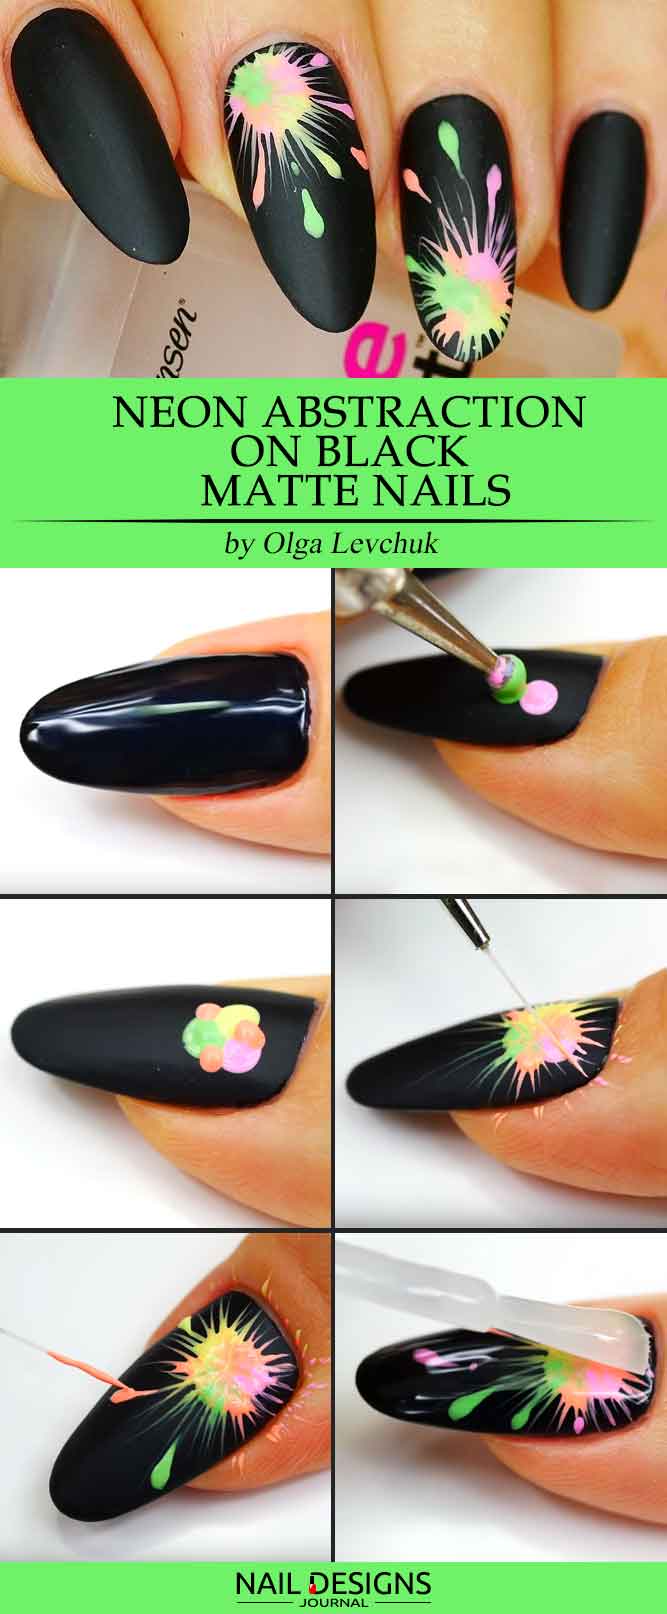 Neon Abstraction on Black Matte Nails